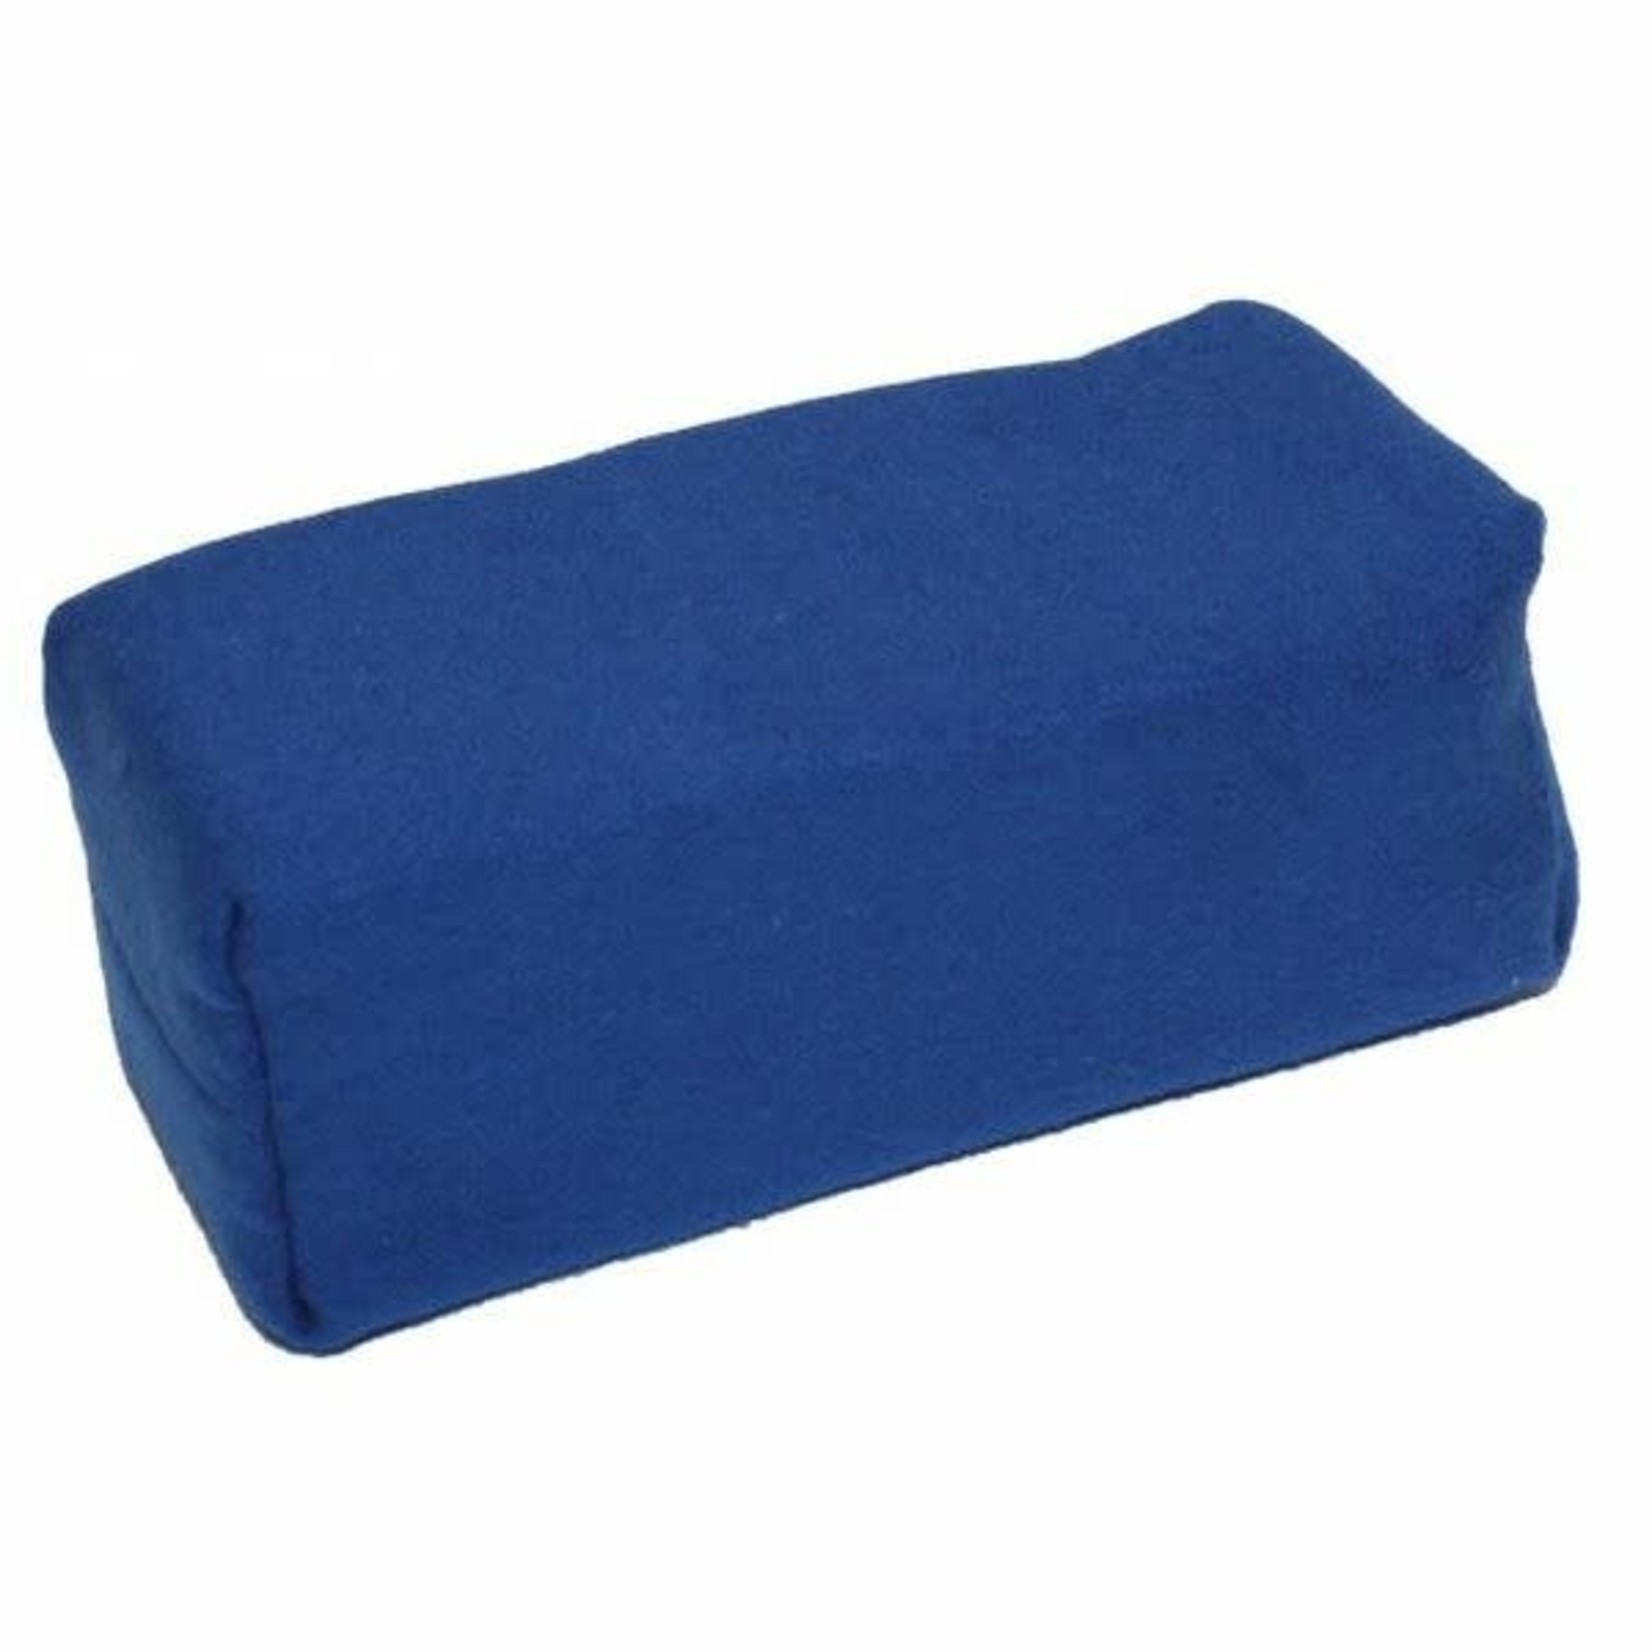 The Rag Company RC - Microsuede Applicator (Blue/White)